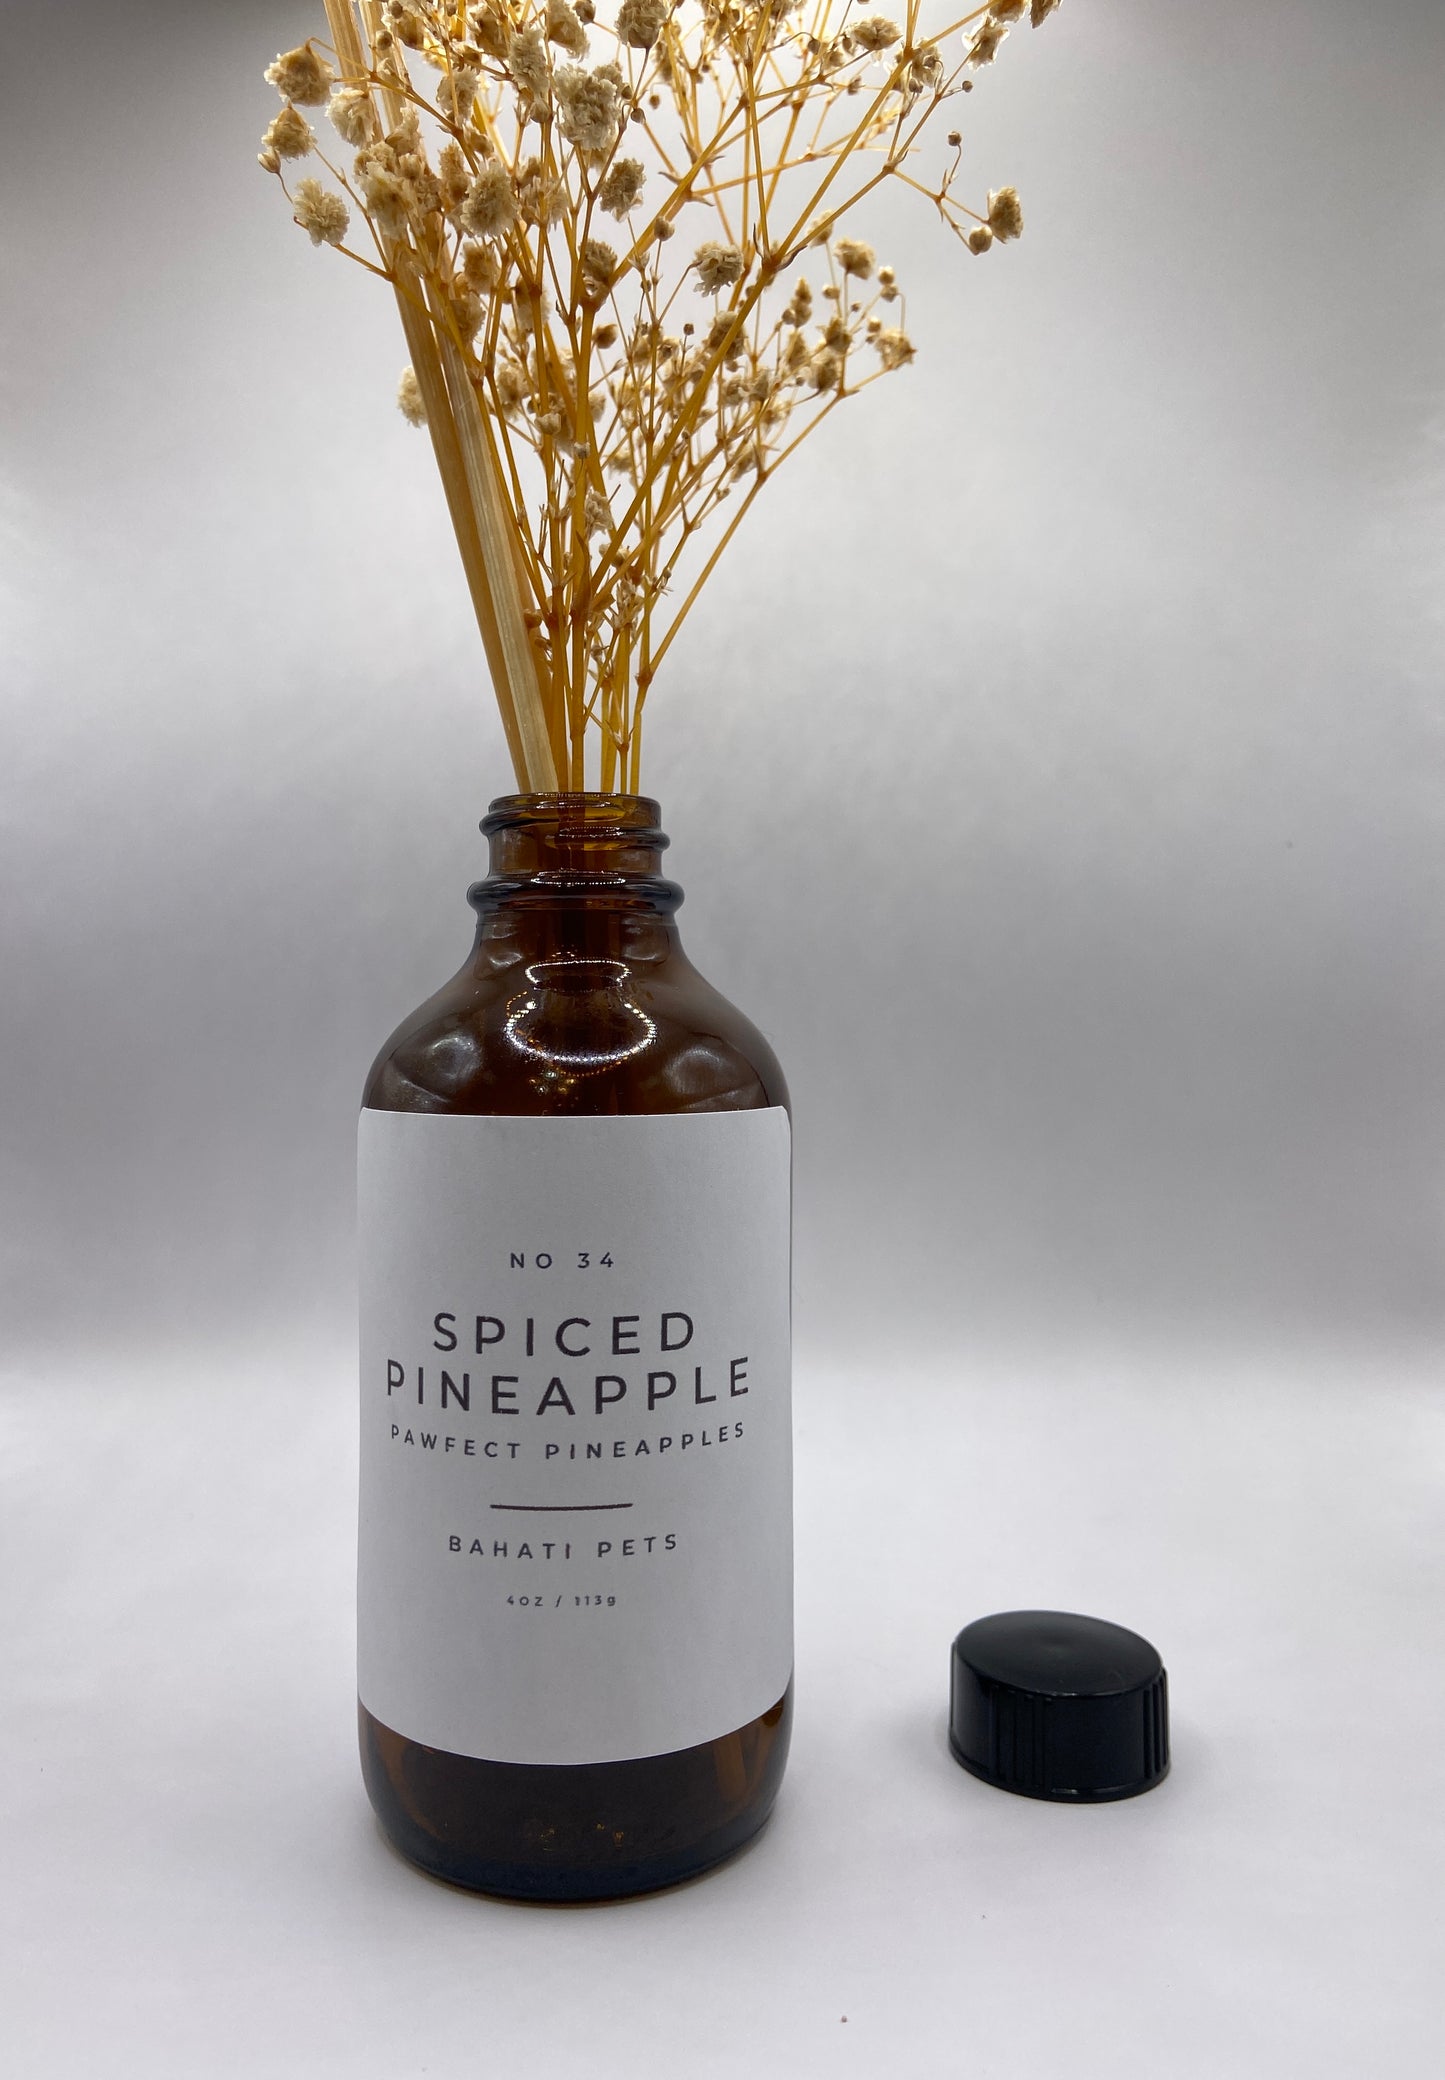 Pawfect Pineapple - Spiced Pineapple Reed Diffuser 4 ounce